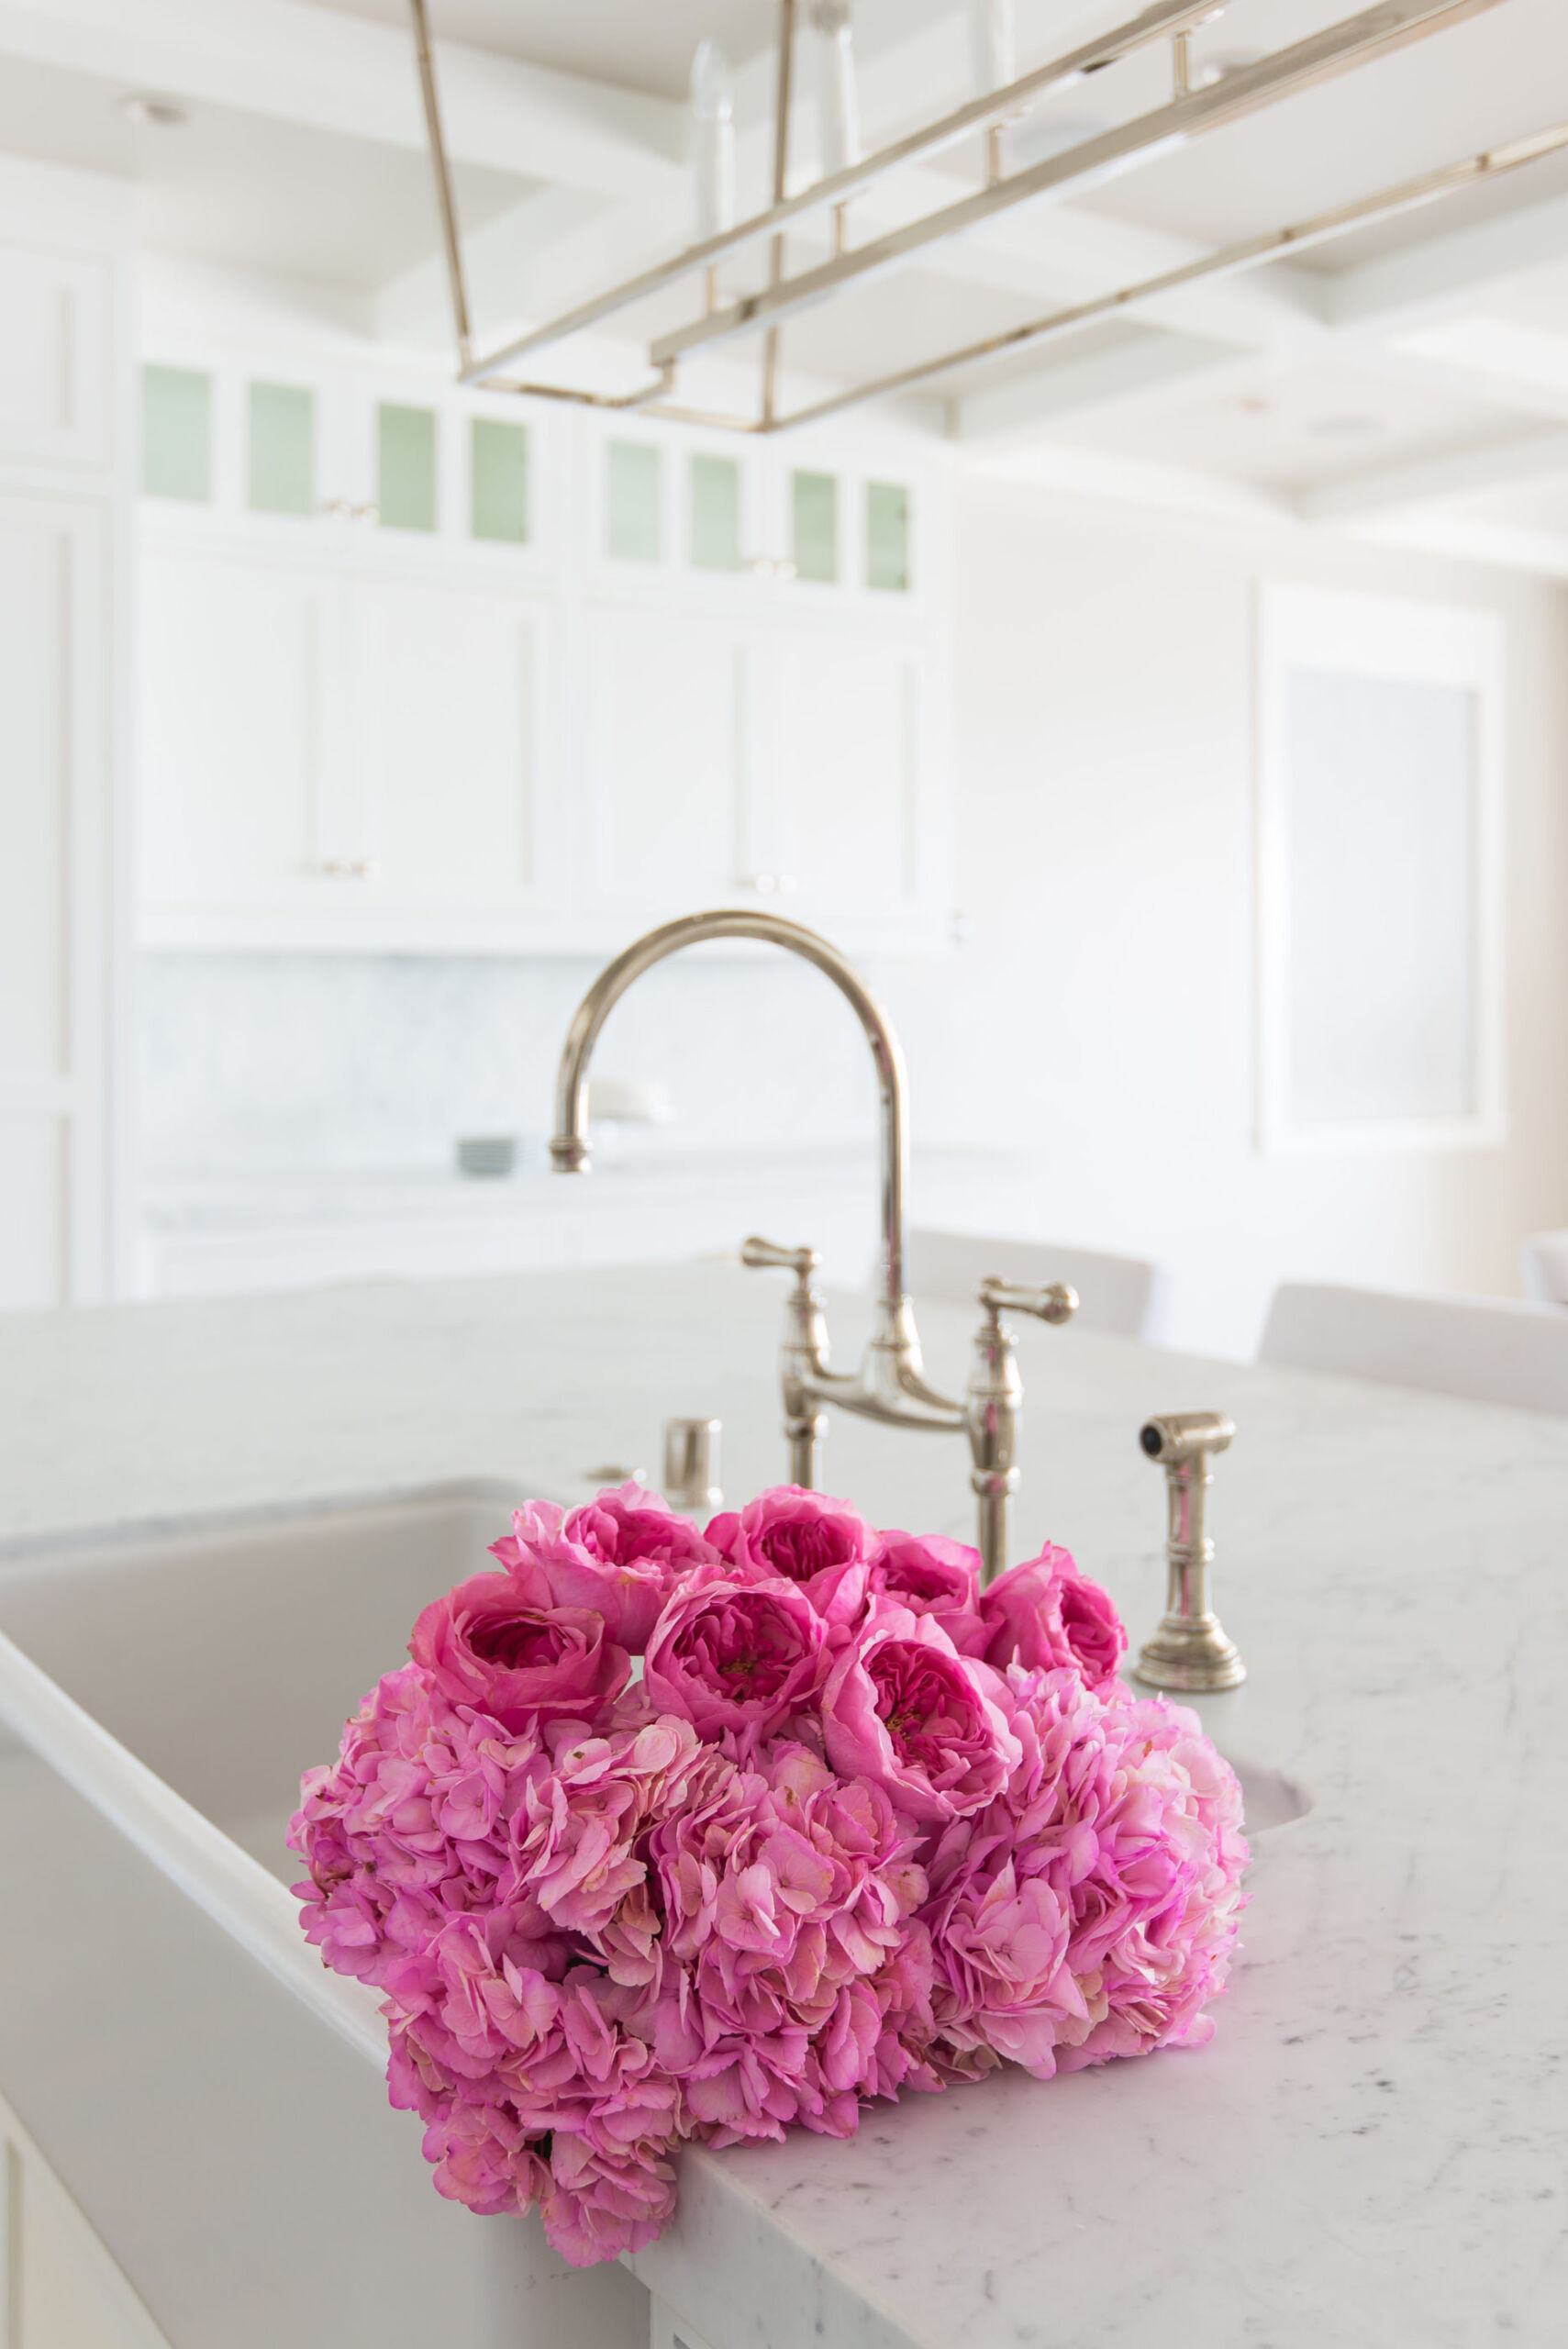 Rohl Faucet Beach House Kitchen Melissa Morgan Design  Scaled